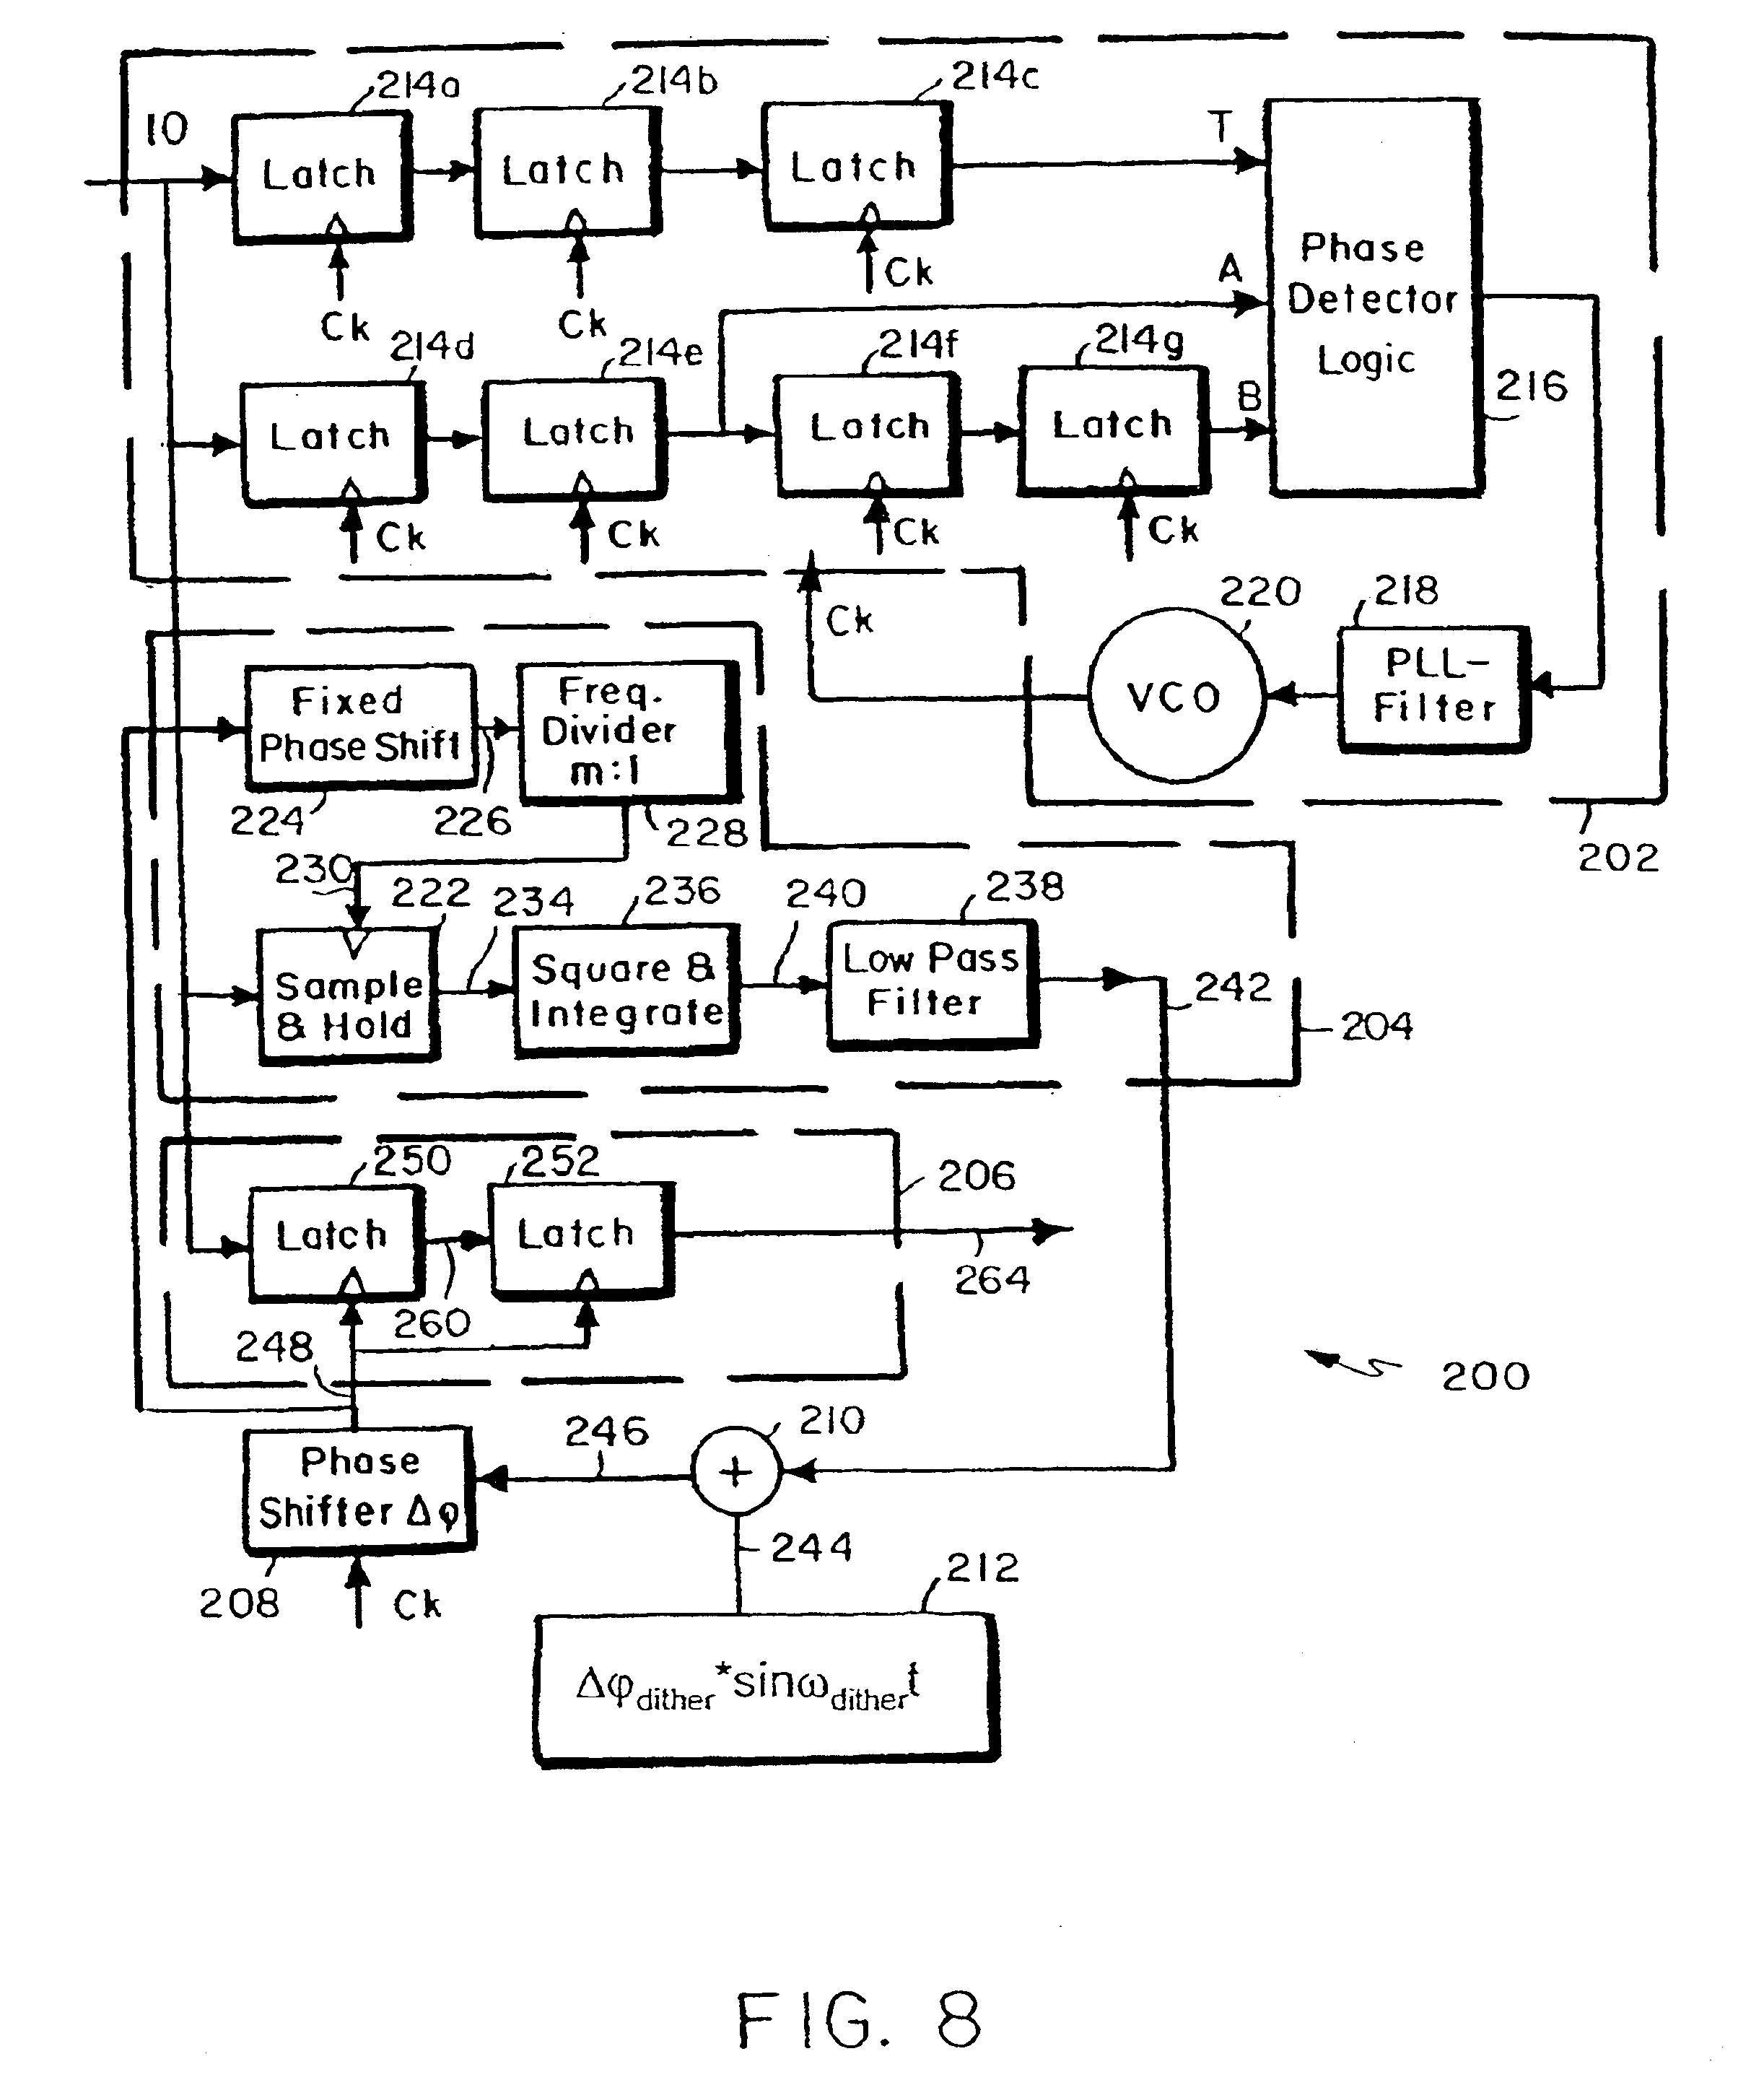 Amplitude detection for controlling the decision instant for sampling as a data flow